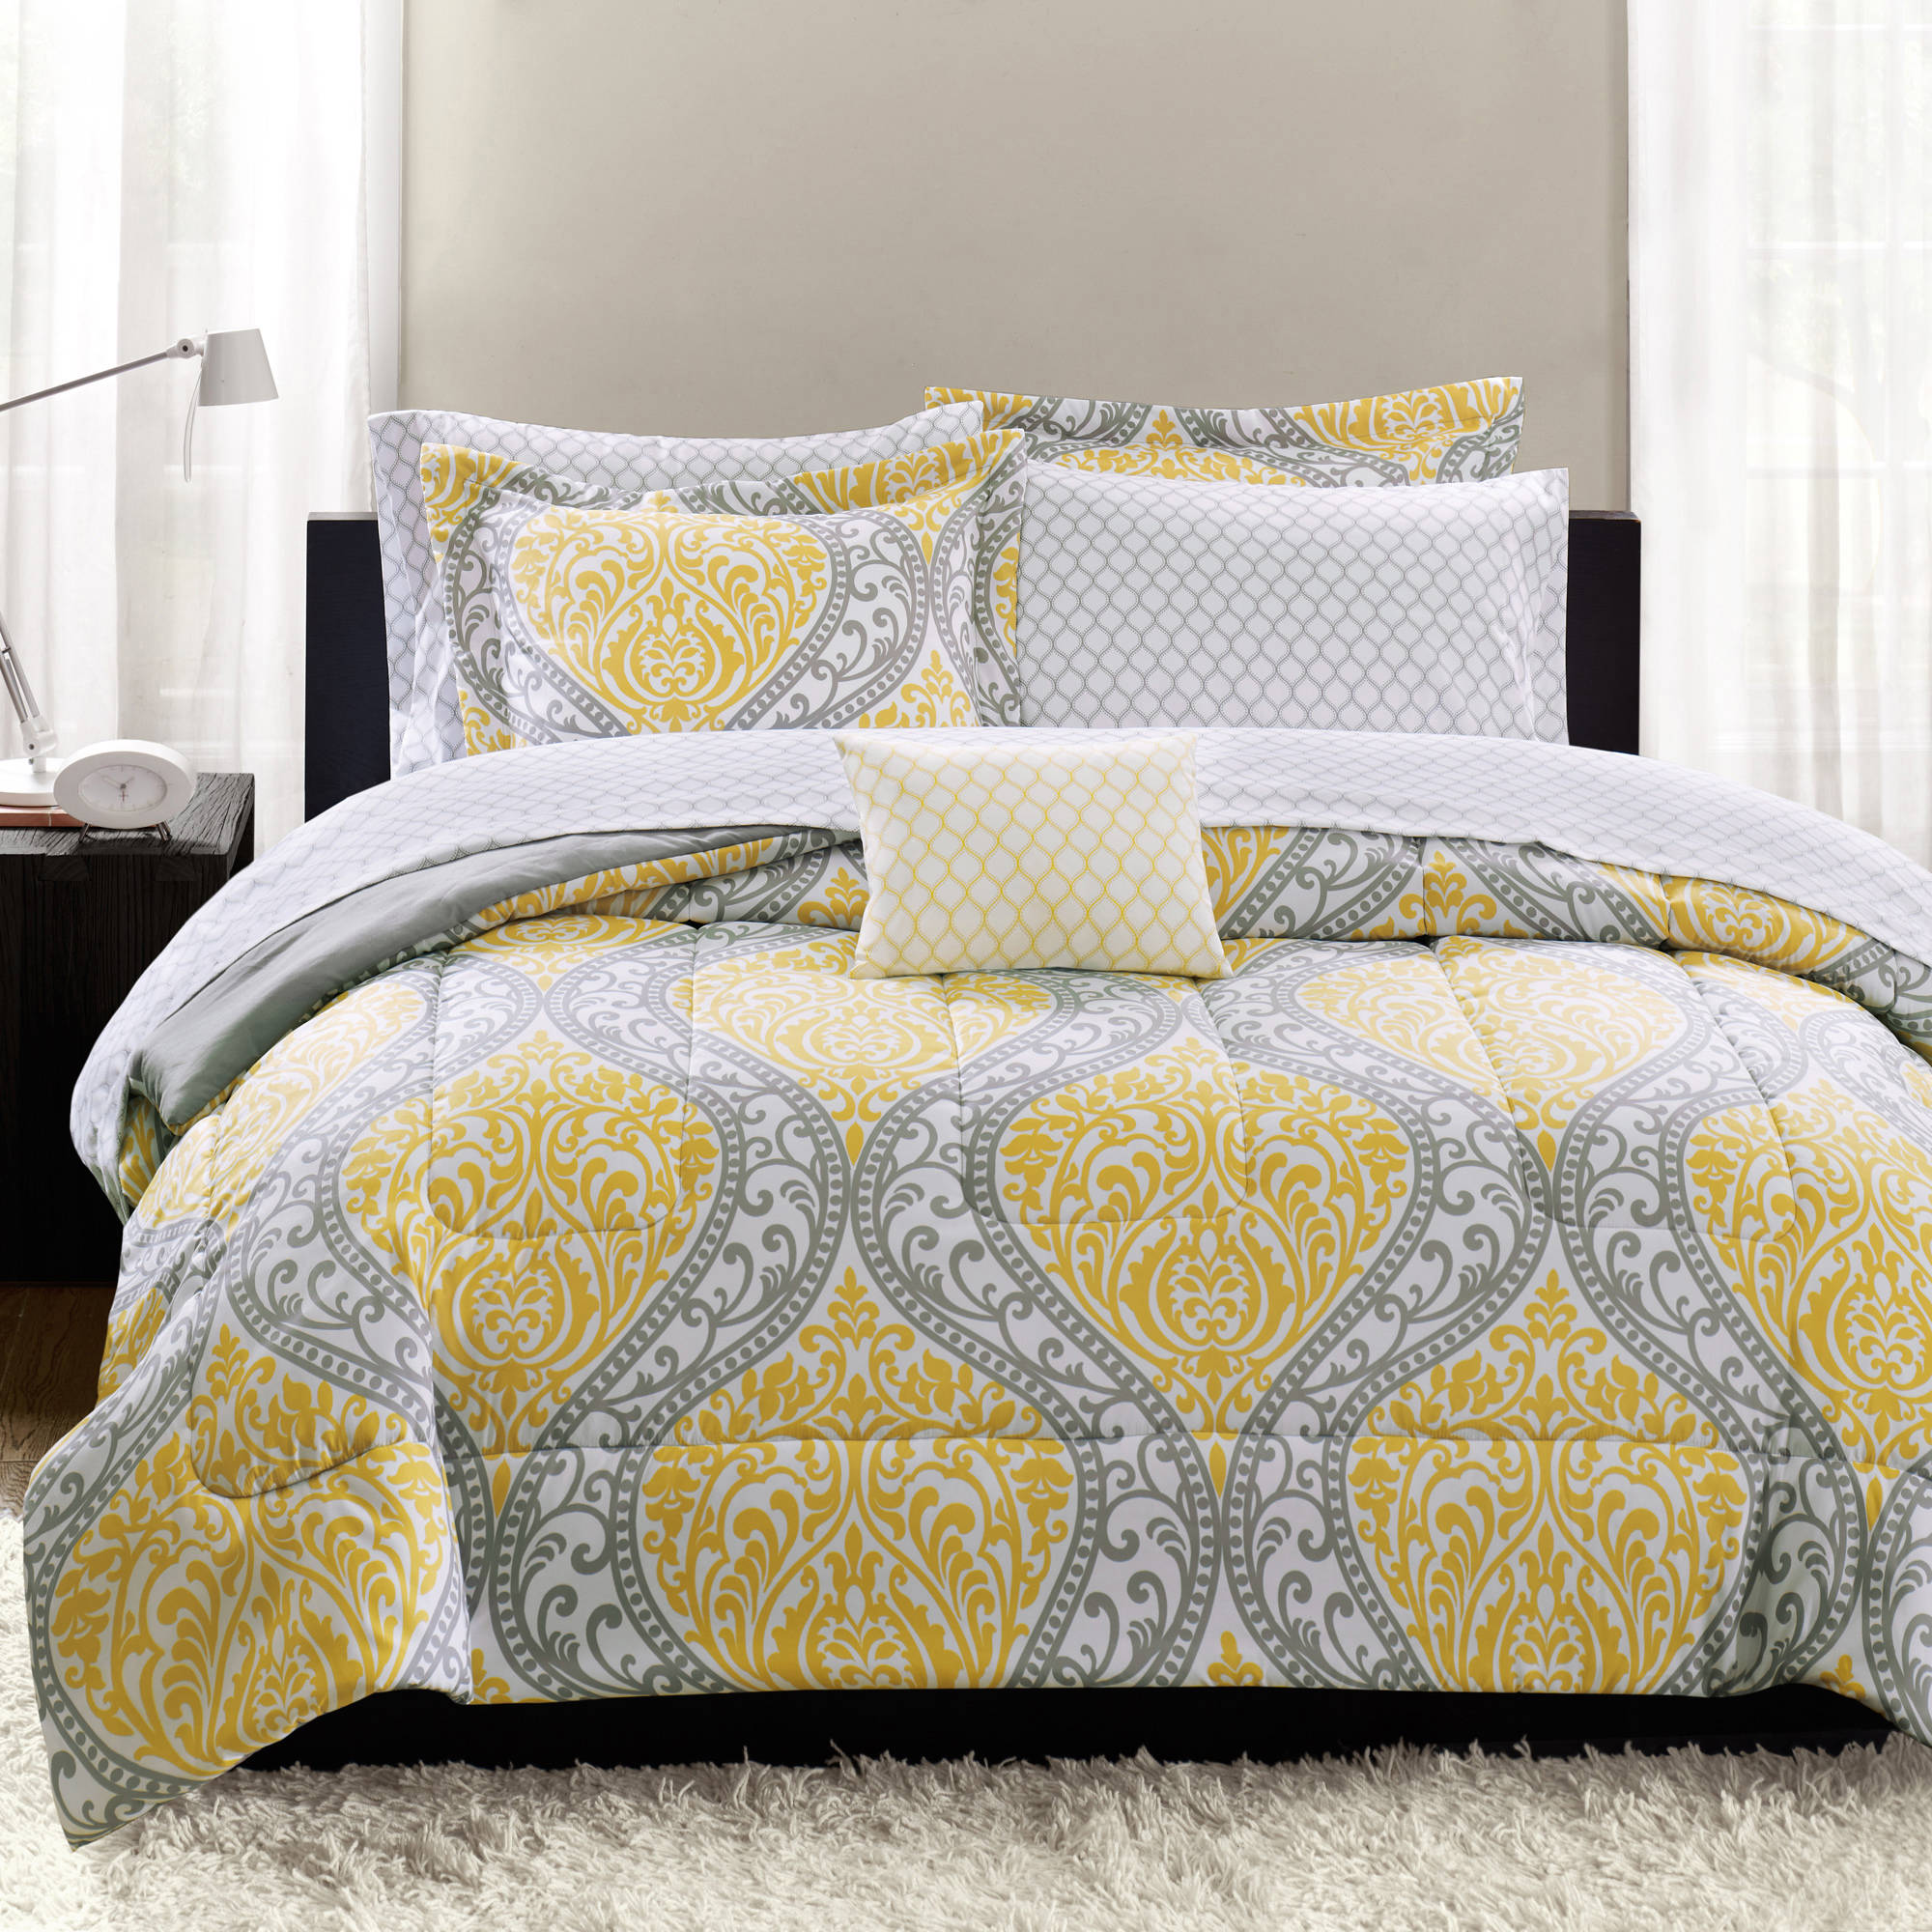 Mainstays Yellow Damask Coordinated Bedding Set Bed in a Bag 